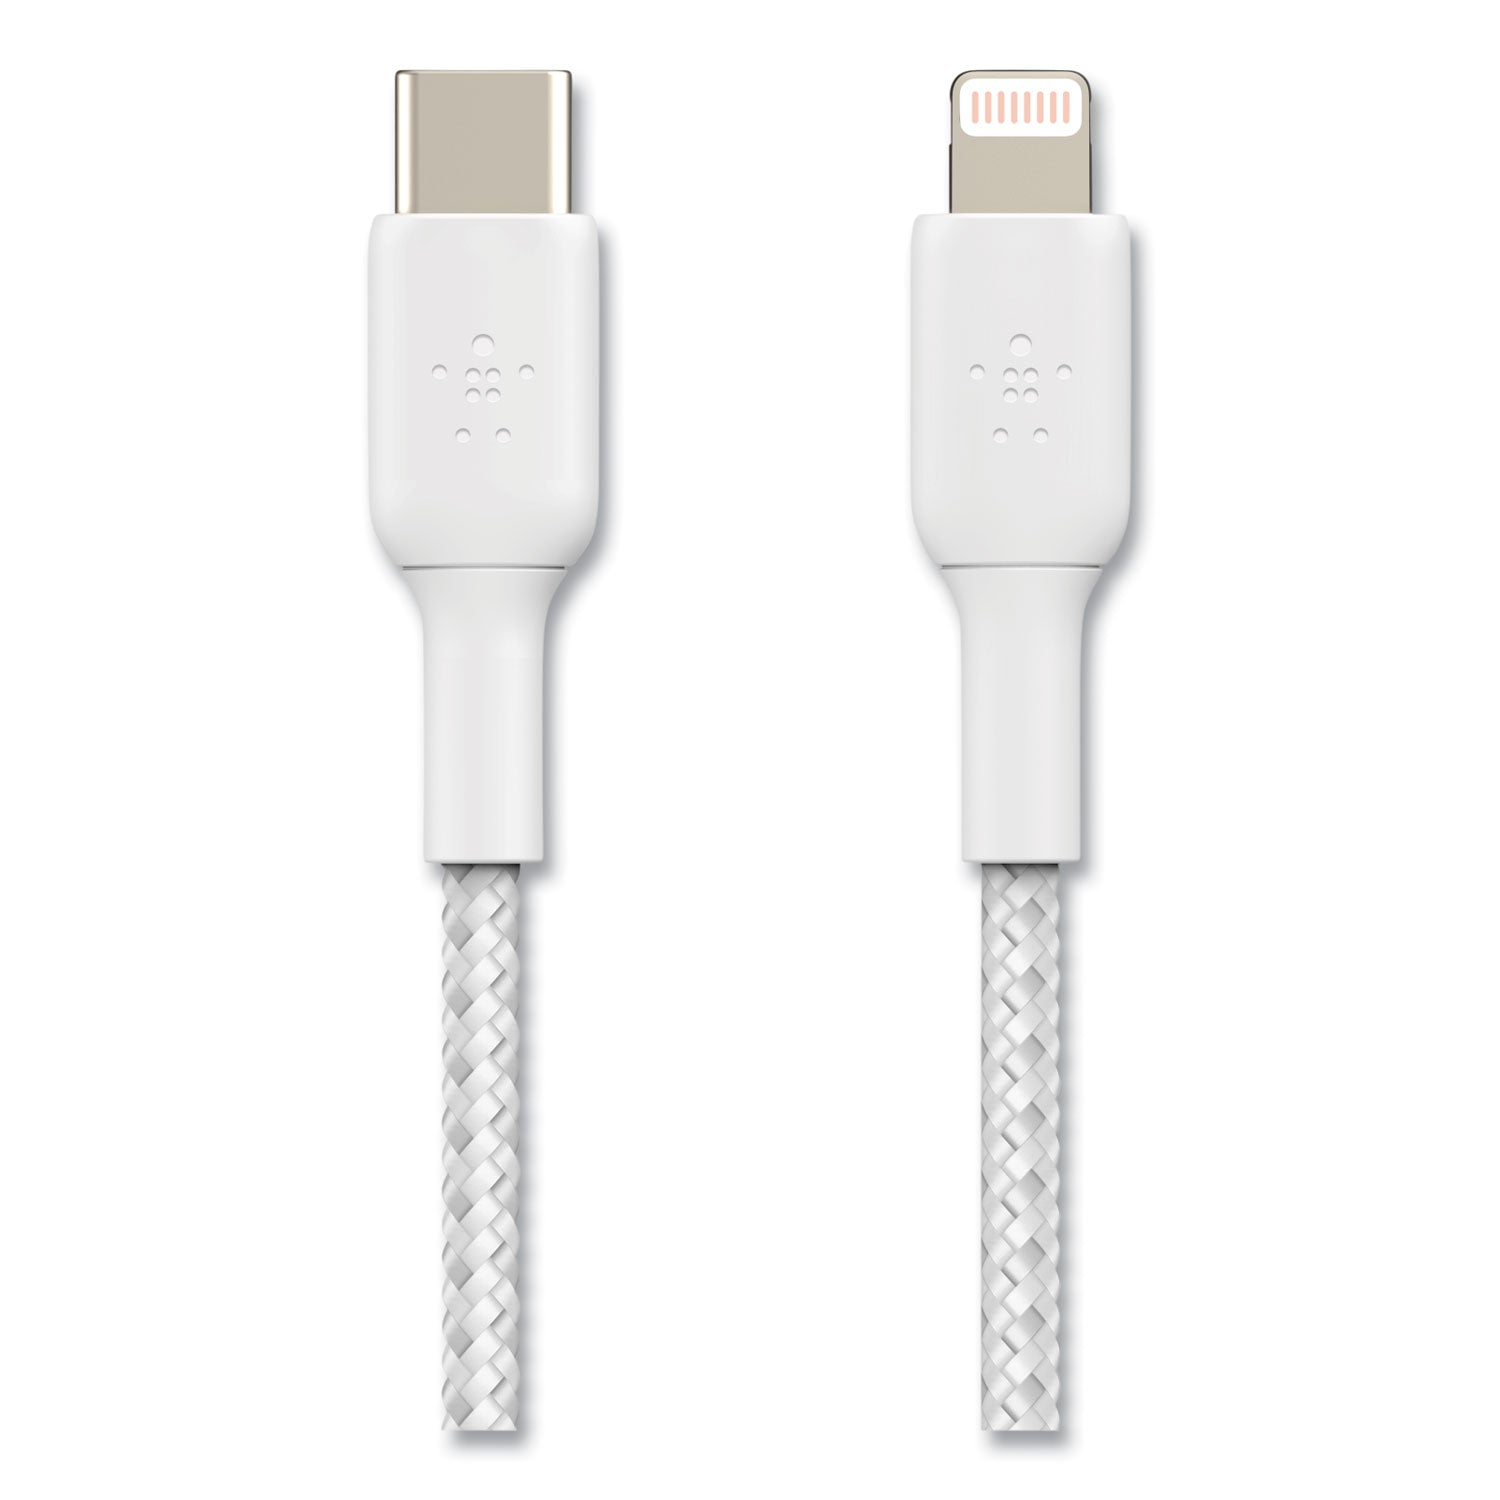 boost-charge-braided-apple-lightning-to-usb-c-chargesync-cable-33-ft-white_blkcaa004bt1mwh - 5